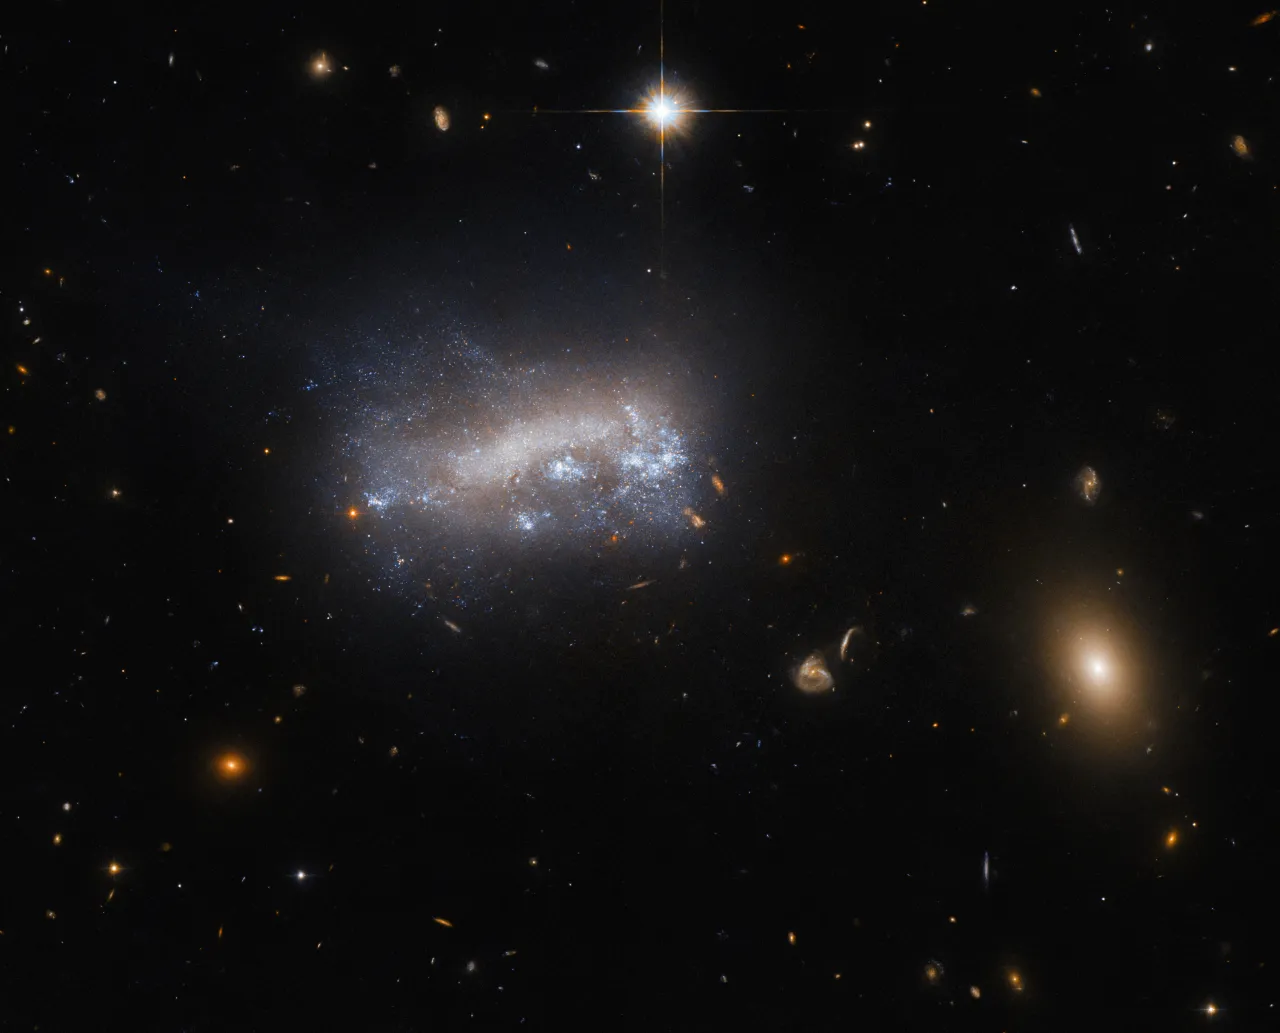 NASA's Hubble Space Telescope Captures Stunning Image of a Dwarf Galaxy Under Pressure